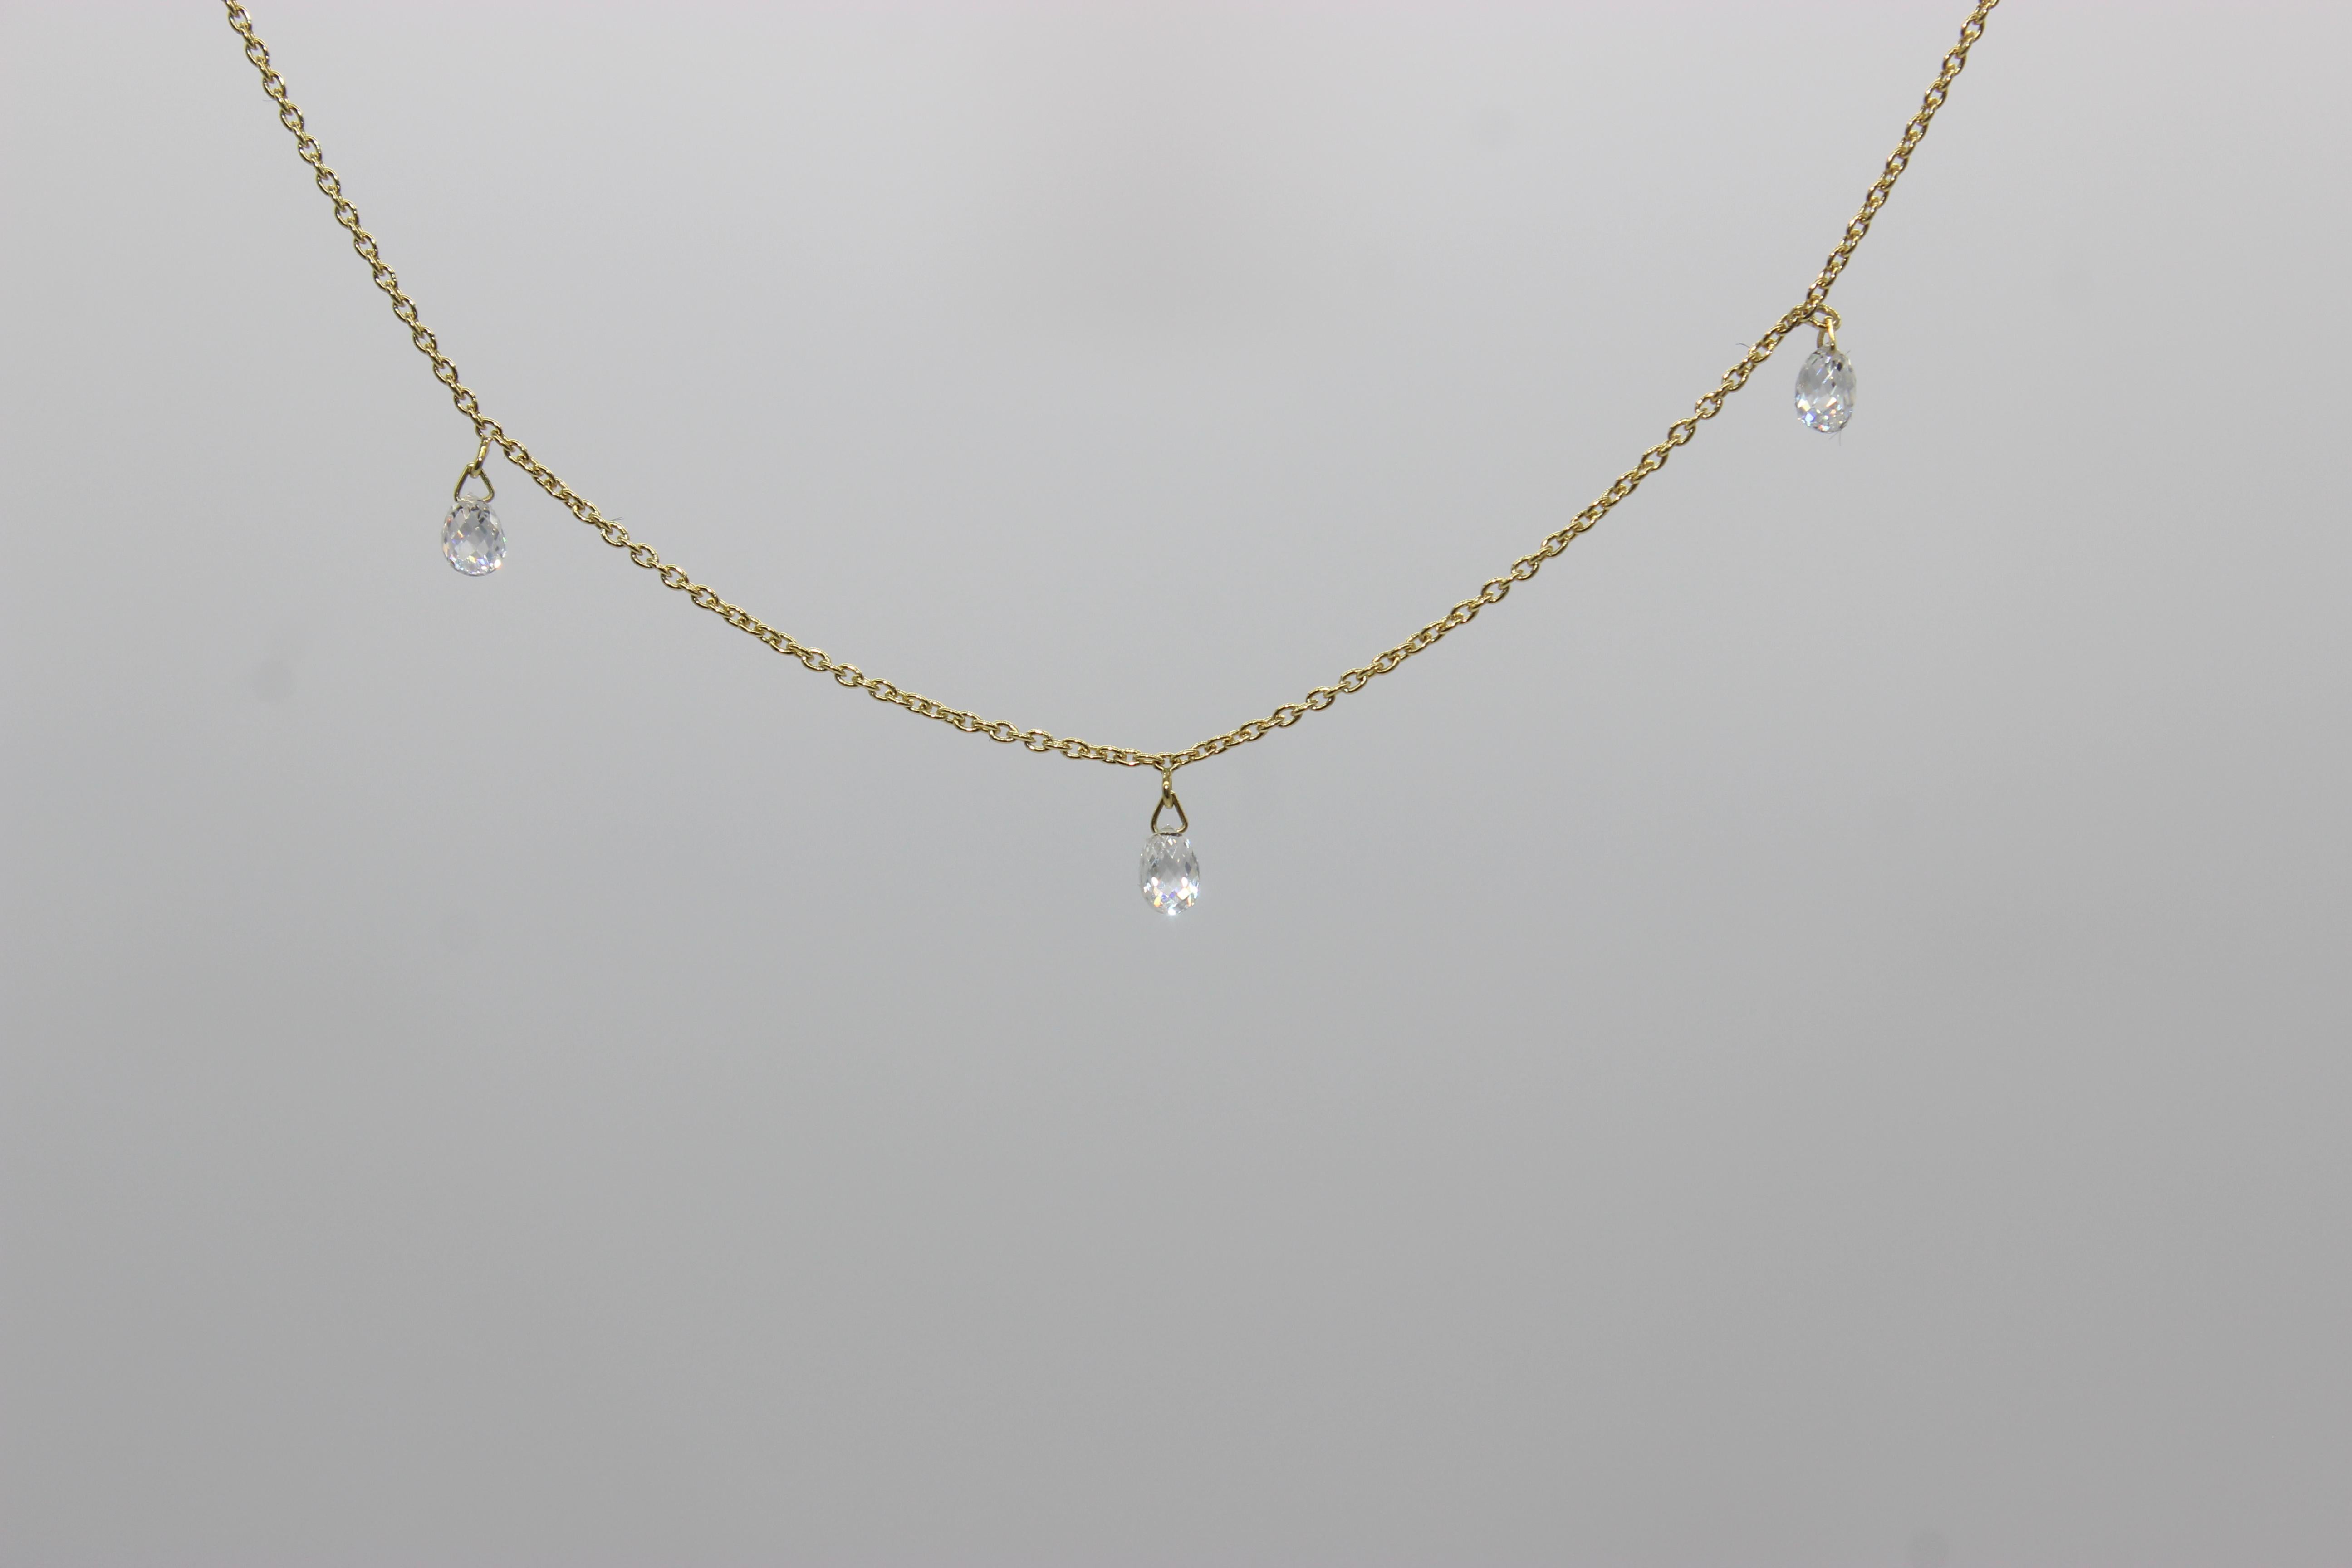 PANIM 5 Dancing Diamond Briolettes 18K Yellow Gold Mille Etoiles Necklace

The diamond briolettes are known for their unique shape and sparkling brilliance. The briolette cut is a type of diamond cut that features elongated facets that create a